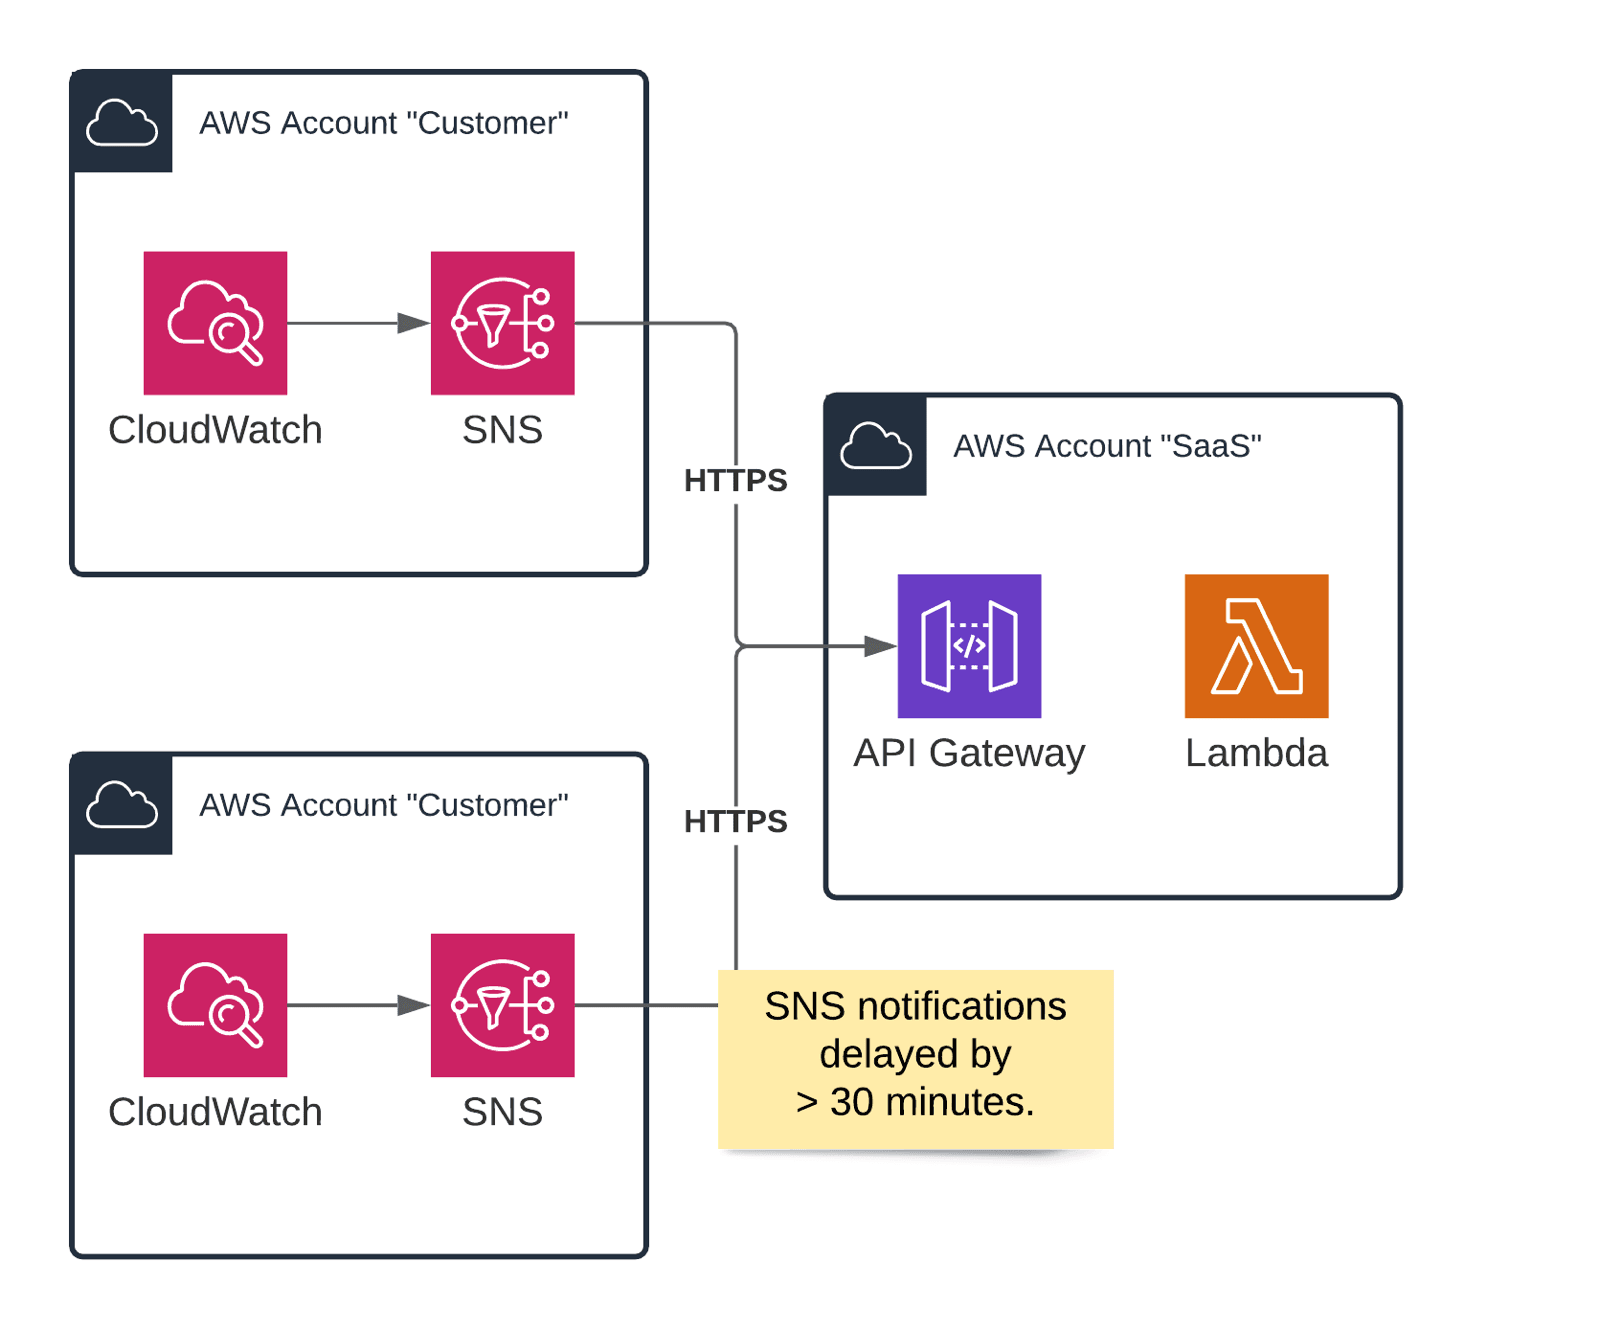 Our Serverless architecture: SNS sends messages to API Gateway